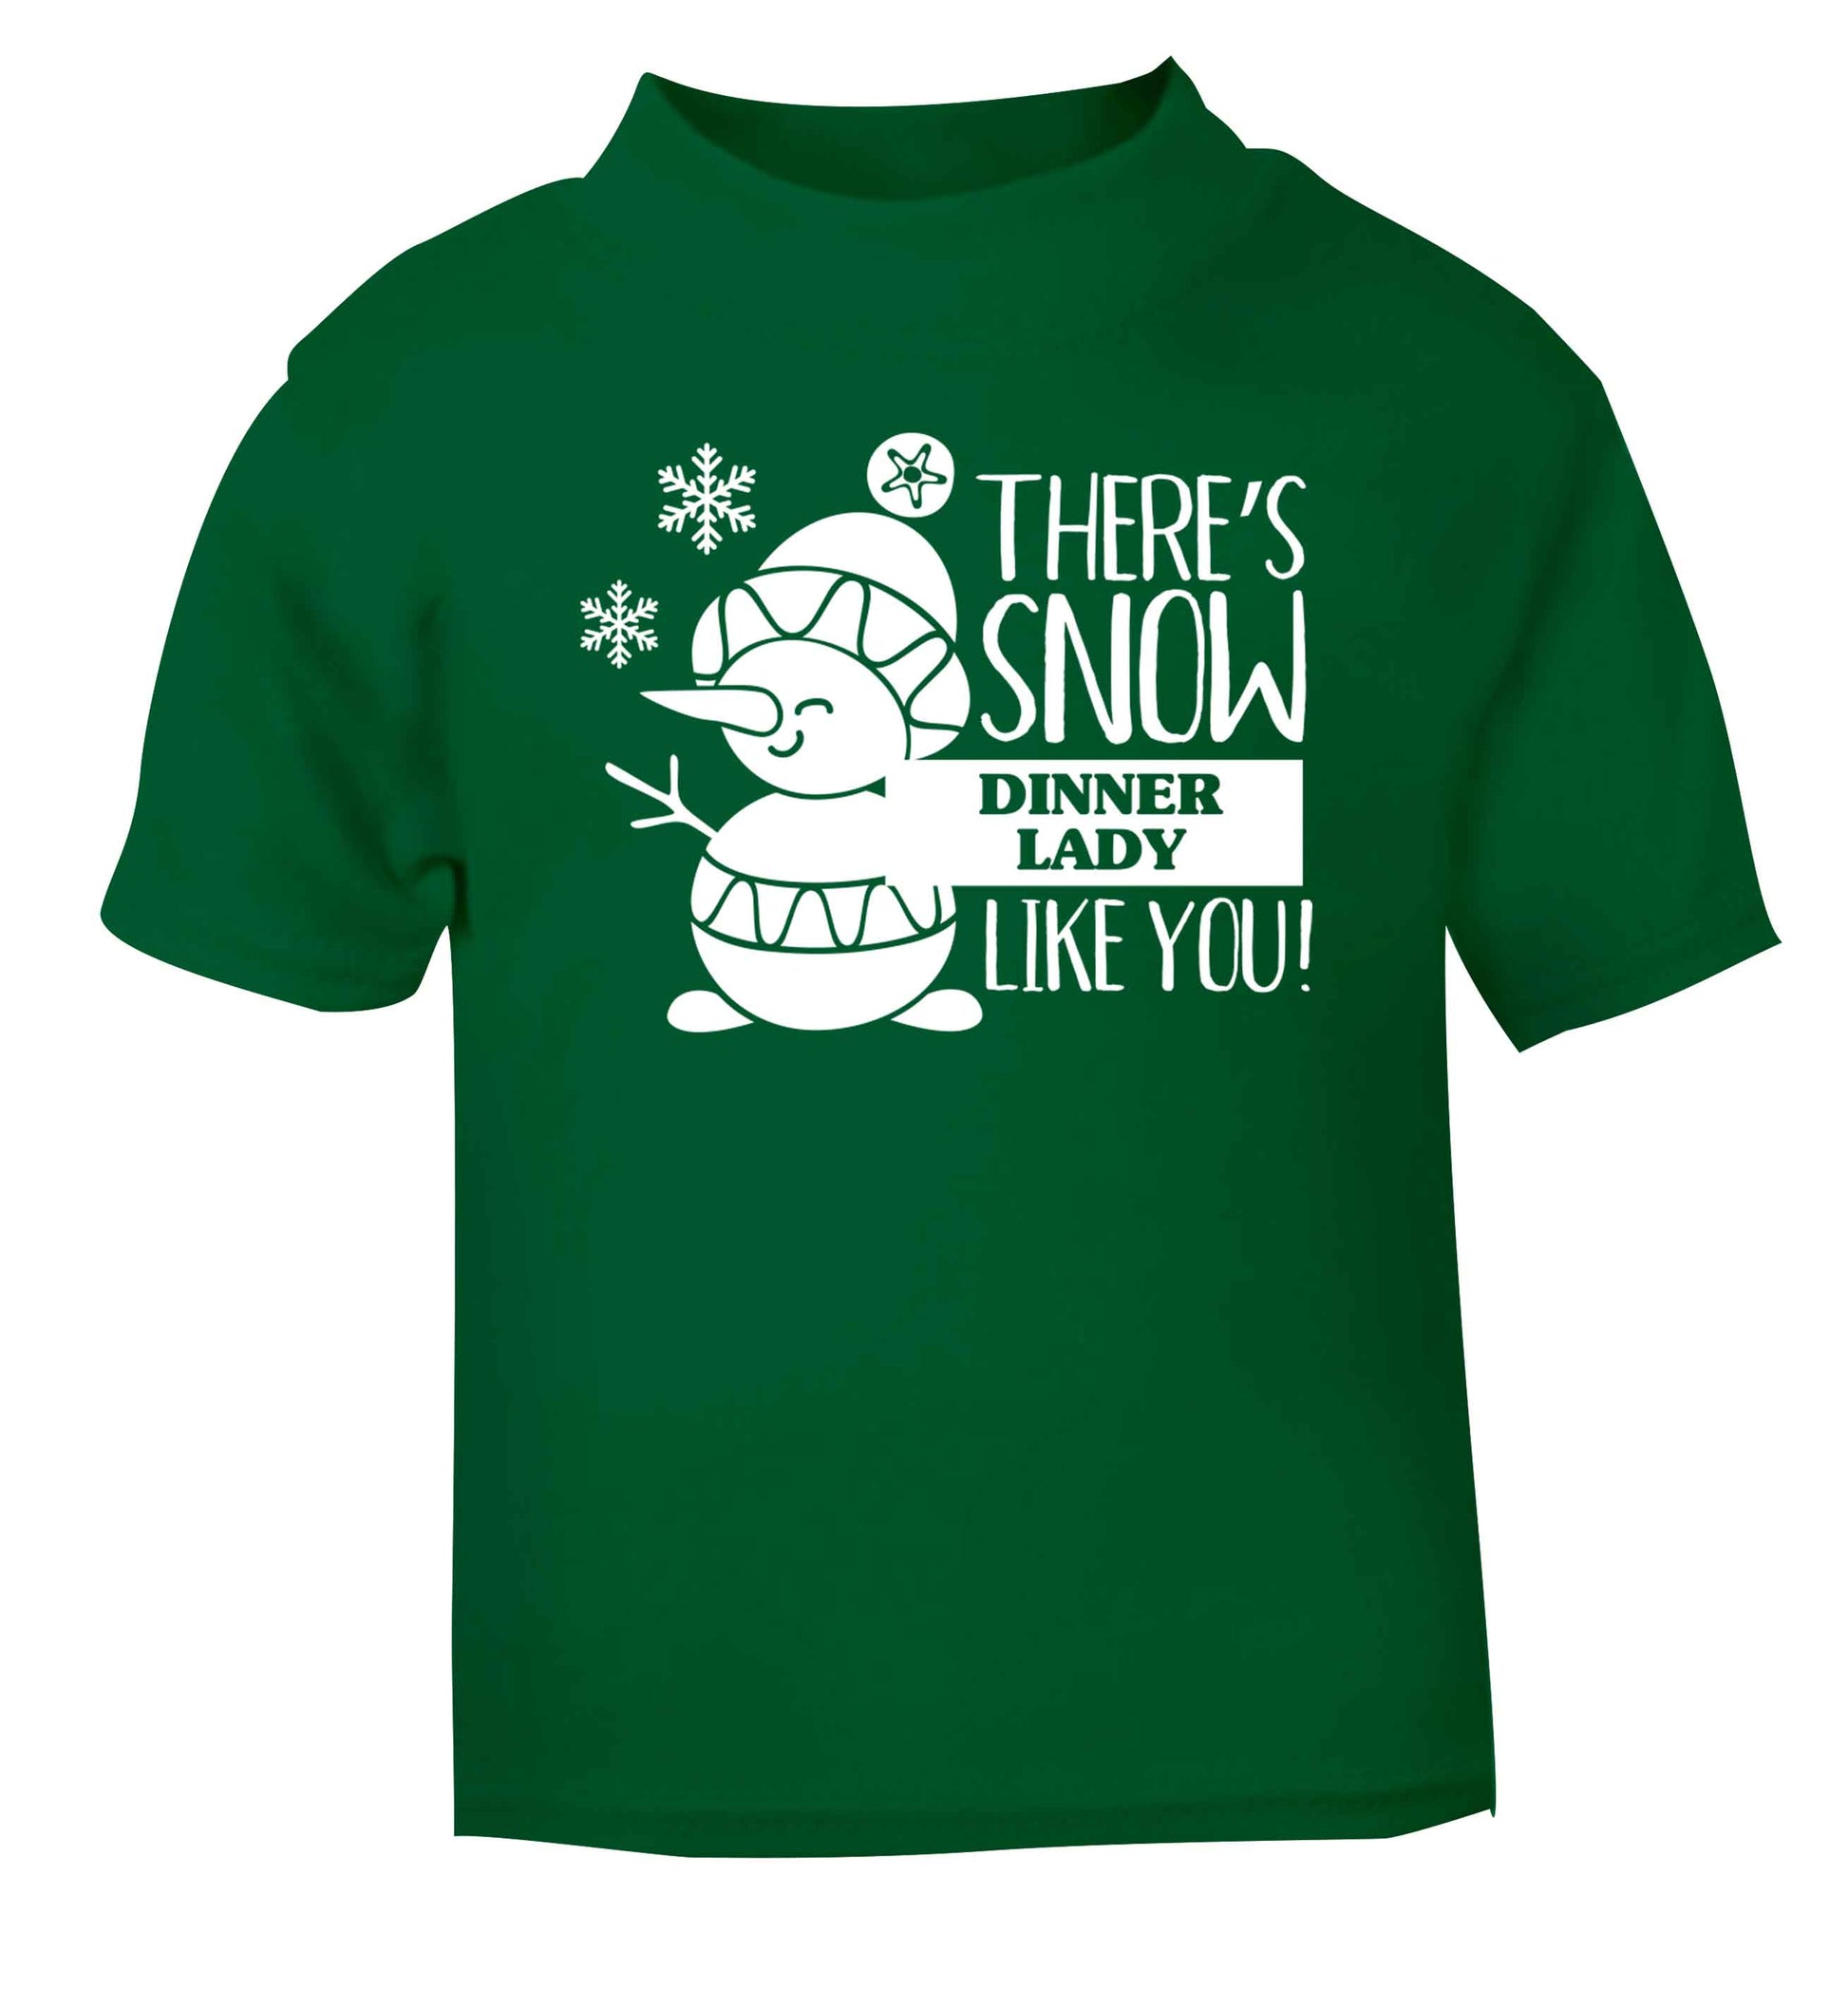 There's snow dinner lady like you green baby toddler Tshirt 2 Years